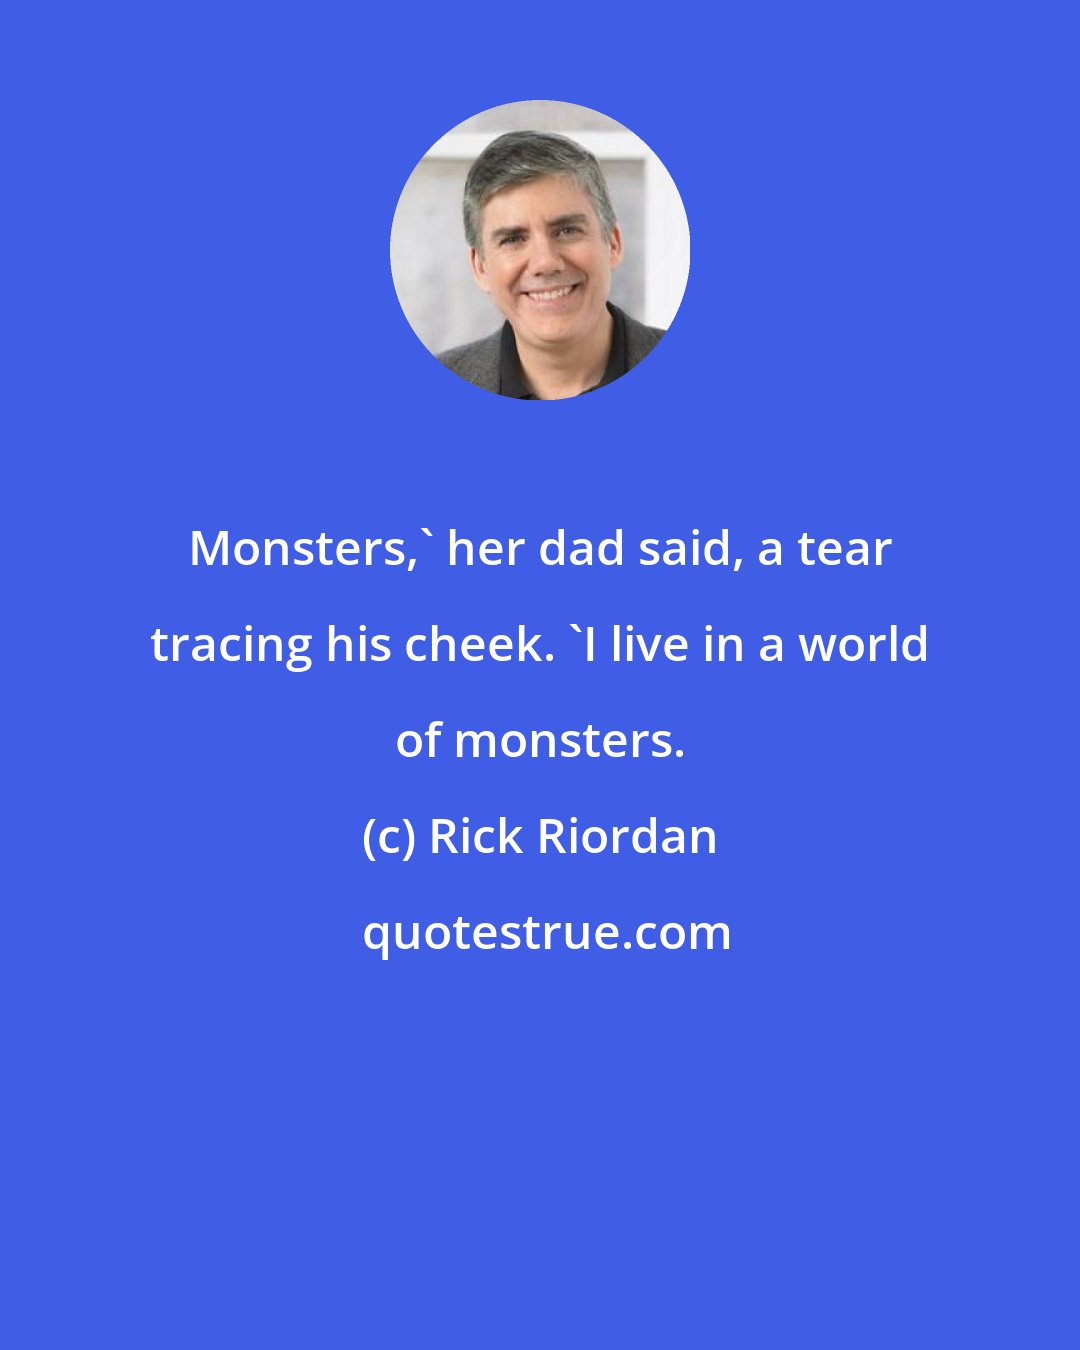 Rick Riordan: Monsters,' her dad said, a tear tracing his cheek. 'I live in a world of monsters.